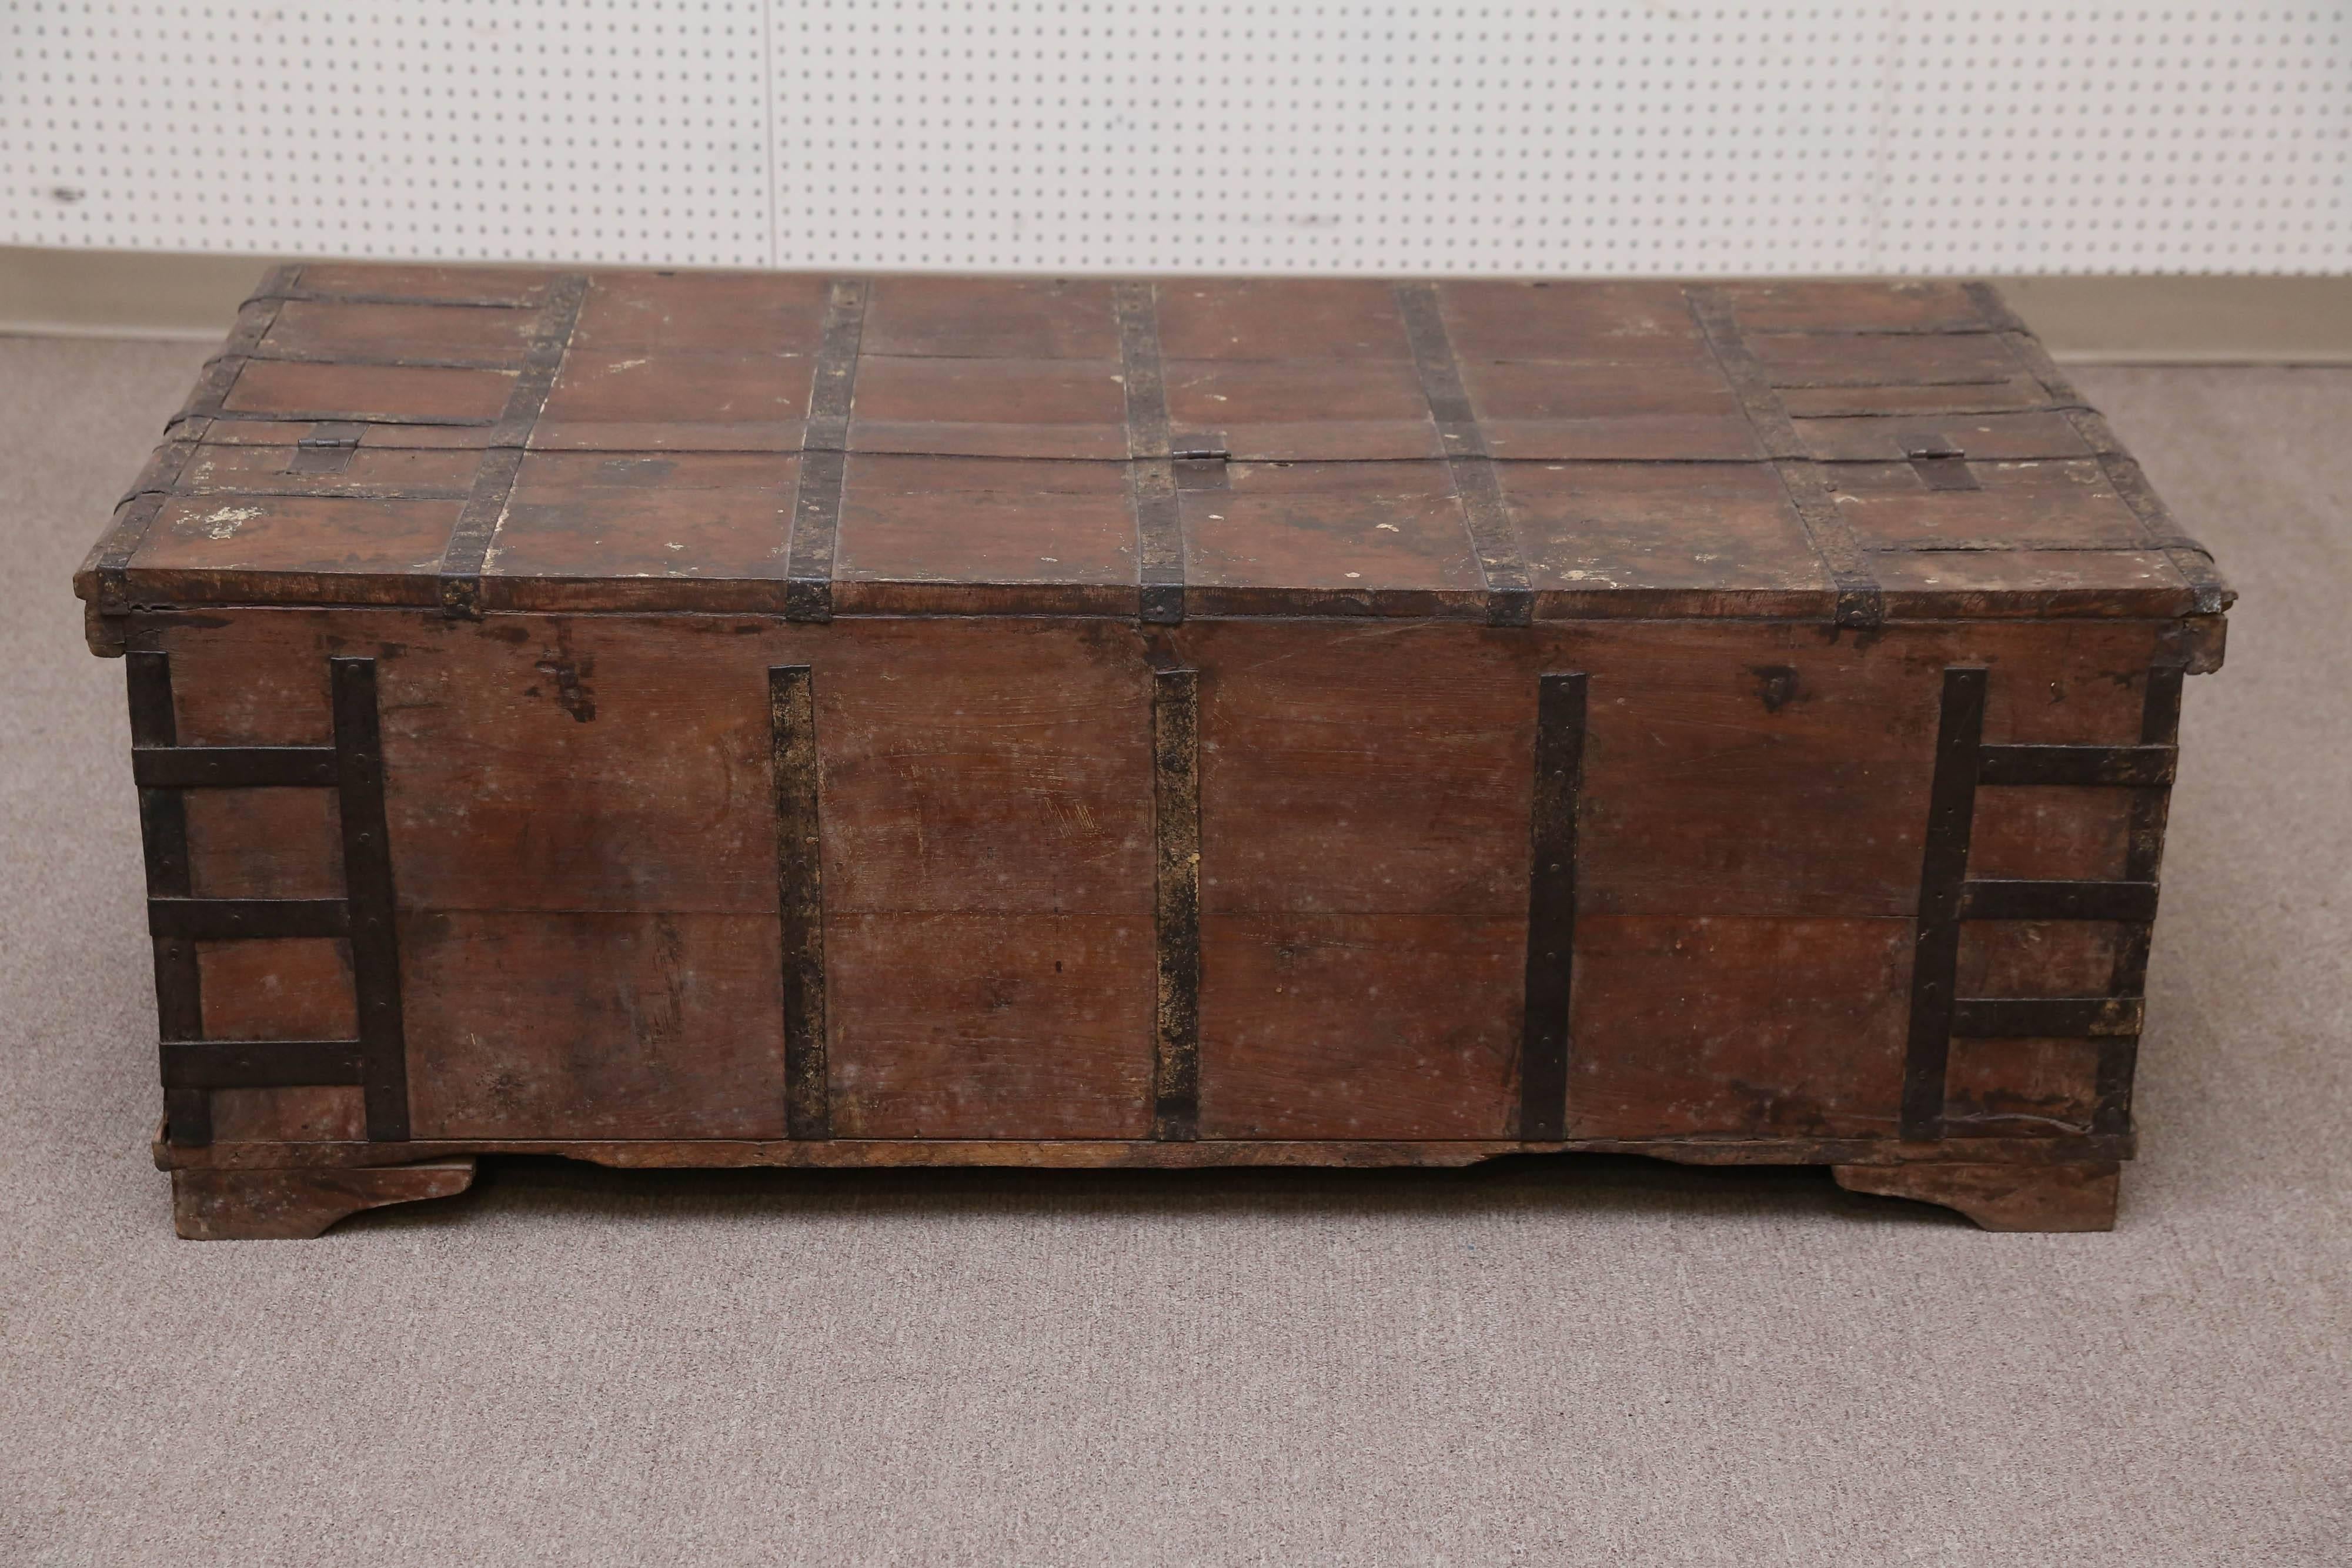 1820s Solid Teak Wood Dowry Chest from Central India For Sale 3